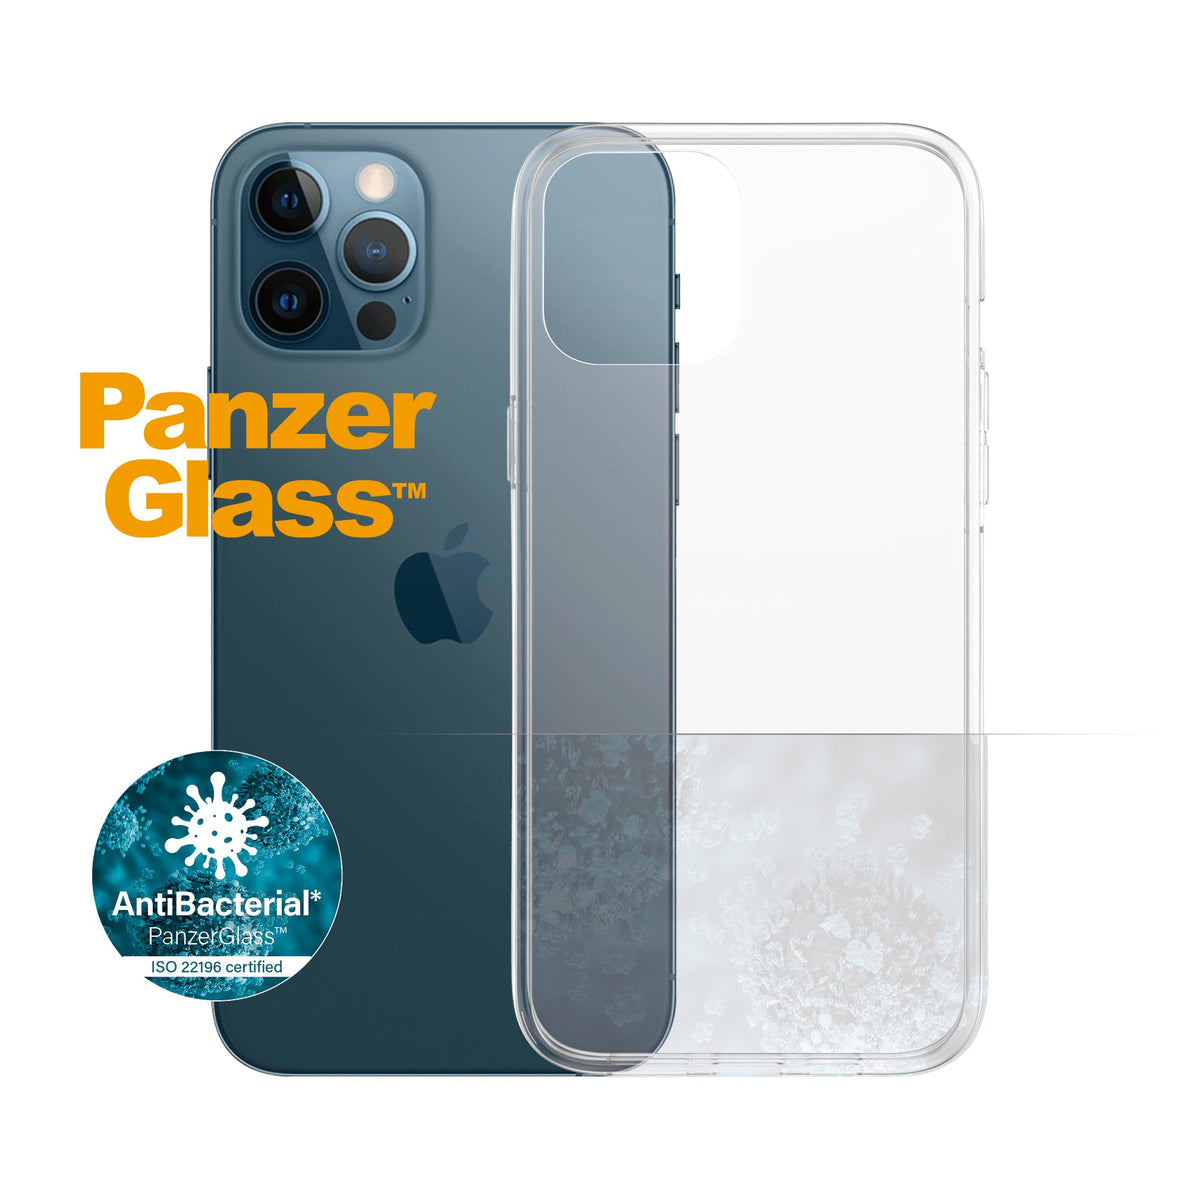 [OPEN BOX] PANZERGLASS iPhone 12 Pro Max - Clear Case Drop Protection Treated w/Anti-Microbial